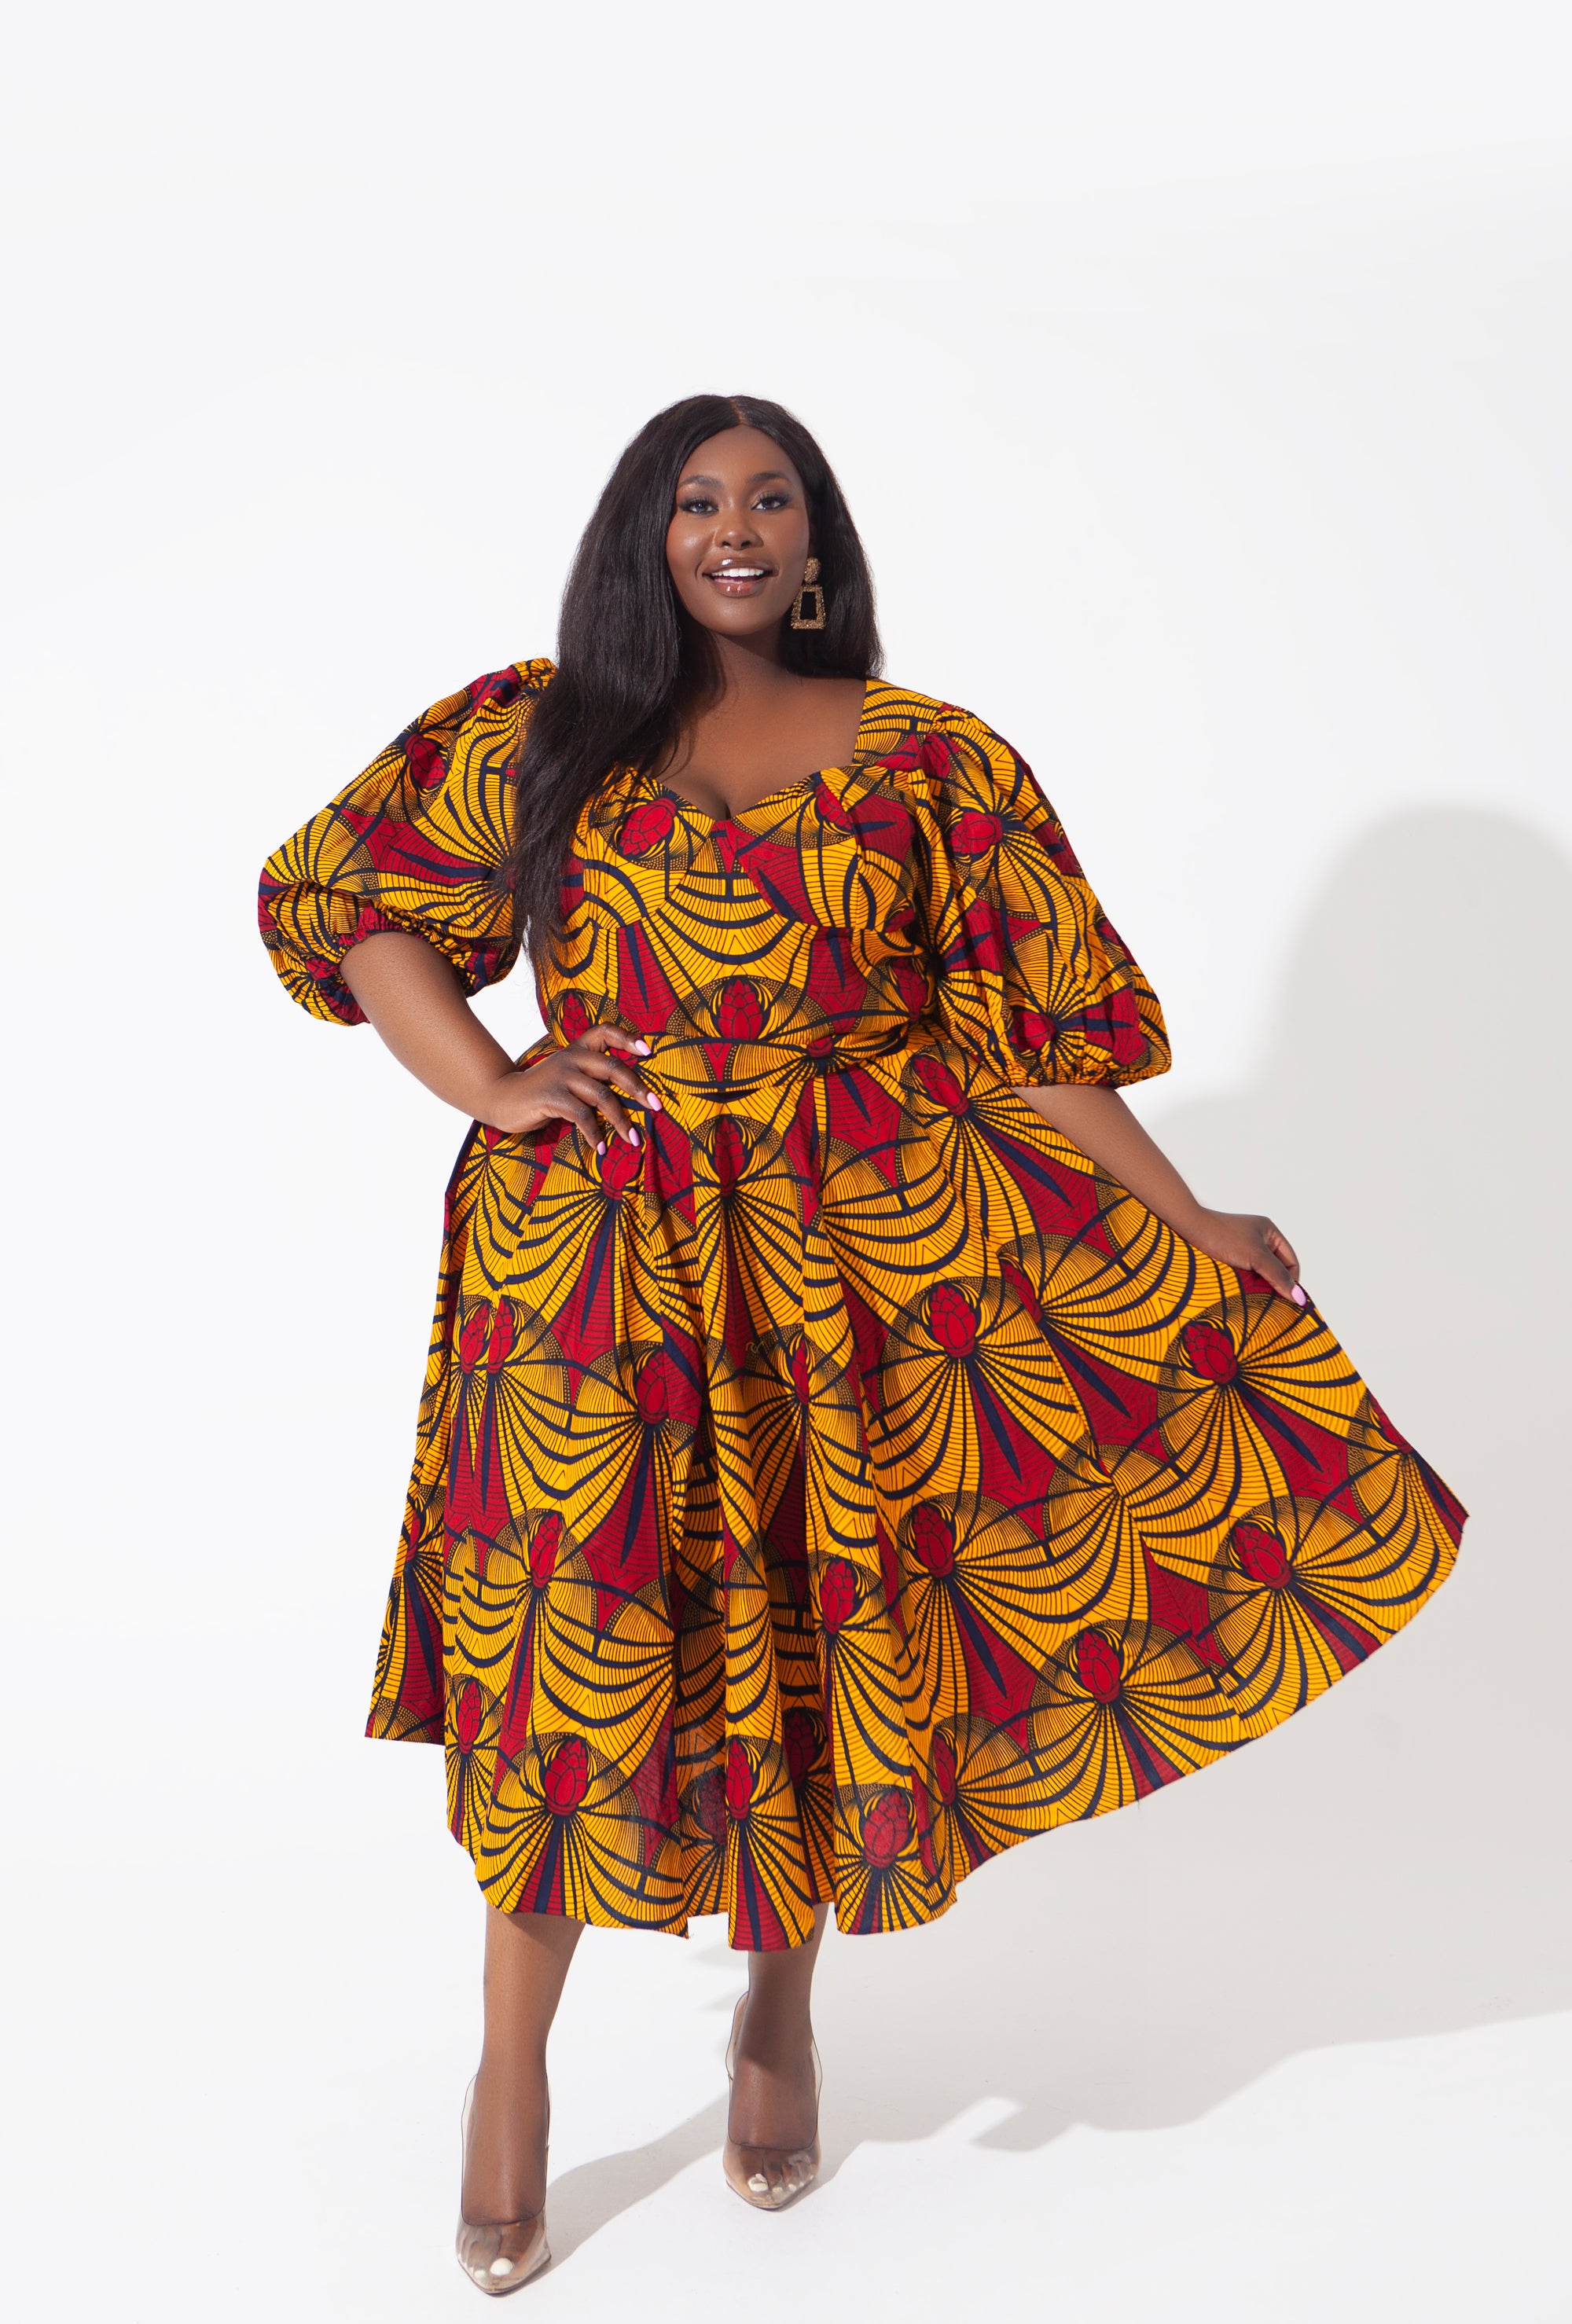 Plus Size African Print Dresses For Women Traditional African